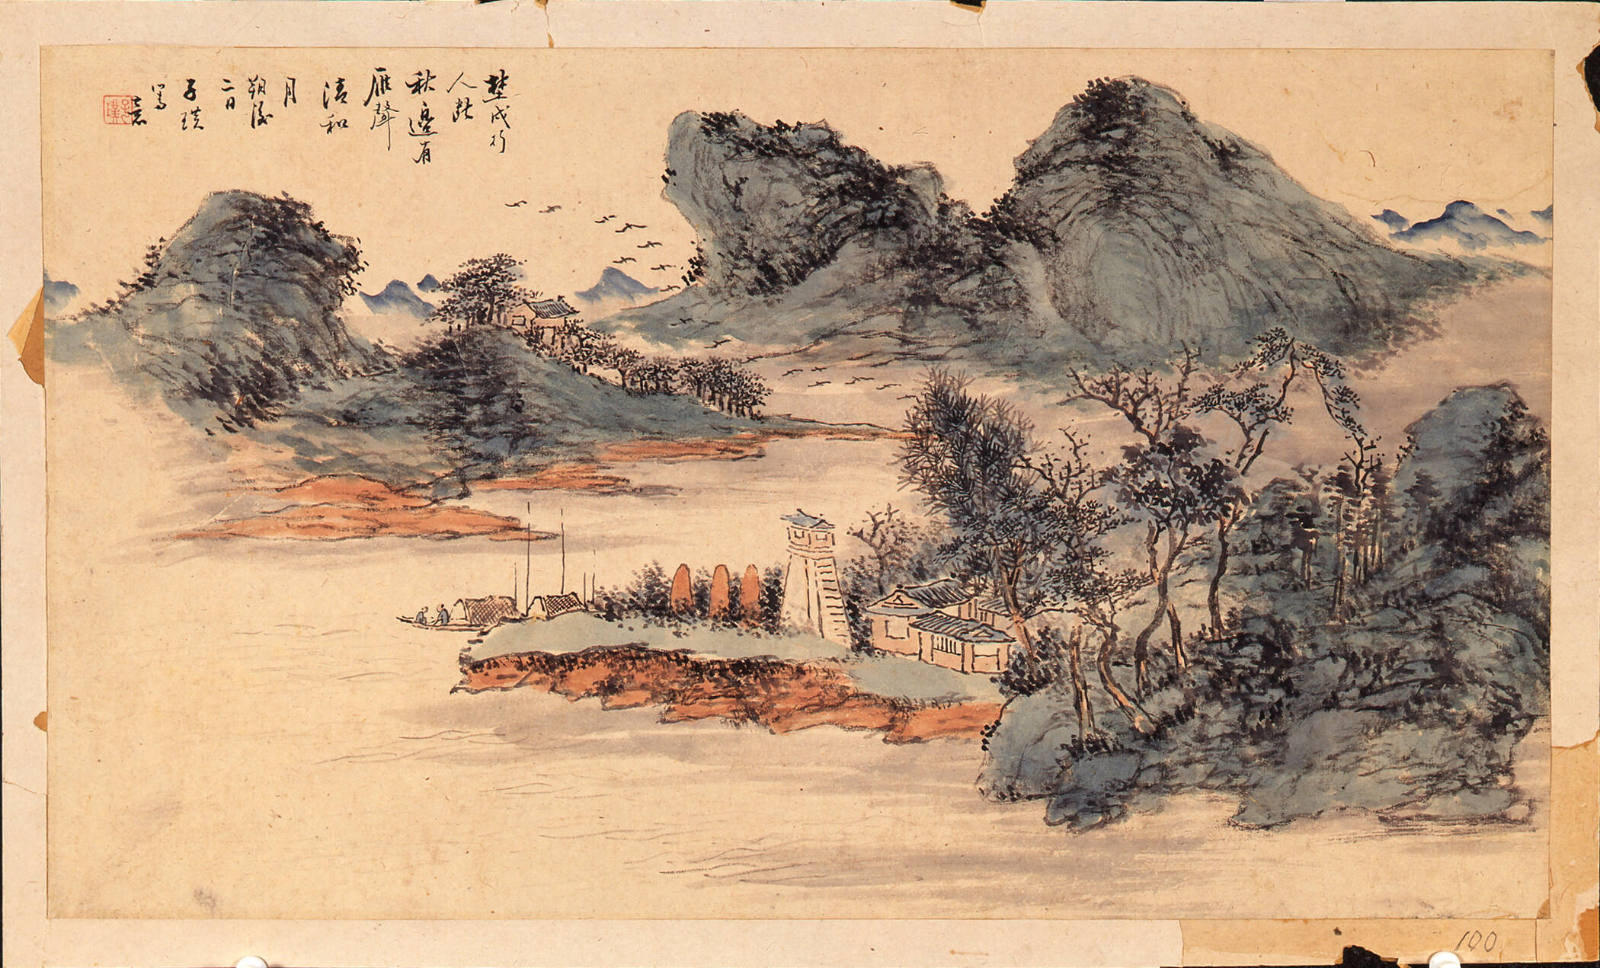 Landscape and Poem: Modified Excerpt from "Thinking of My Brothers on a Moonlit Night" by Du Fu (712–770)